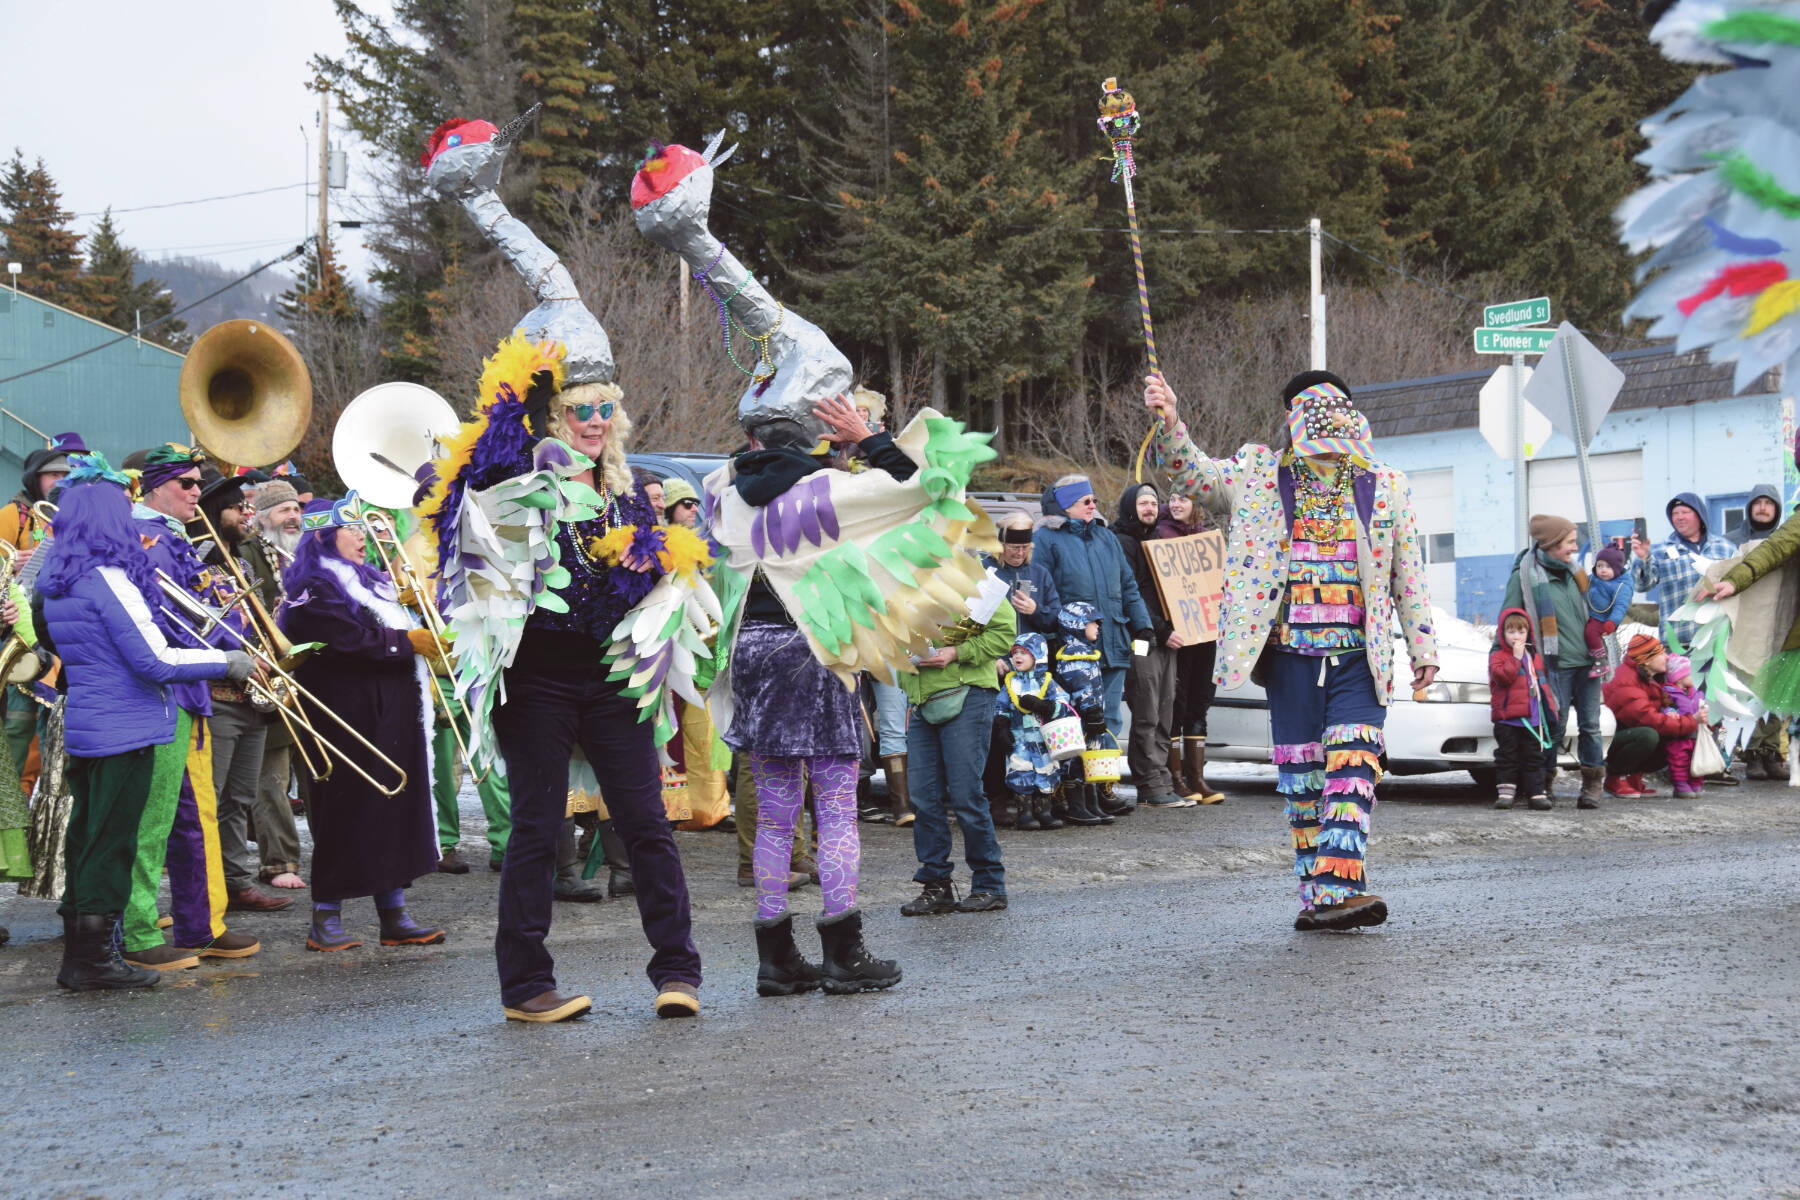 Costumed members of the Krewe of Gambrinus dance to their band playing “Celebration” in the background at the 70th annual Homer Winter Carnival Parade on Pioneer Avenue on Saturday, Feb. 10, 2024 in Homer, Alaska. (Delcenia Cosman/Homer News)